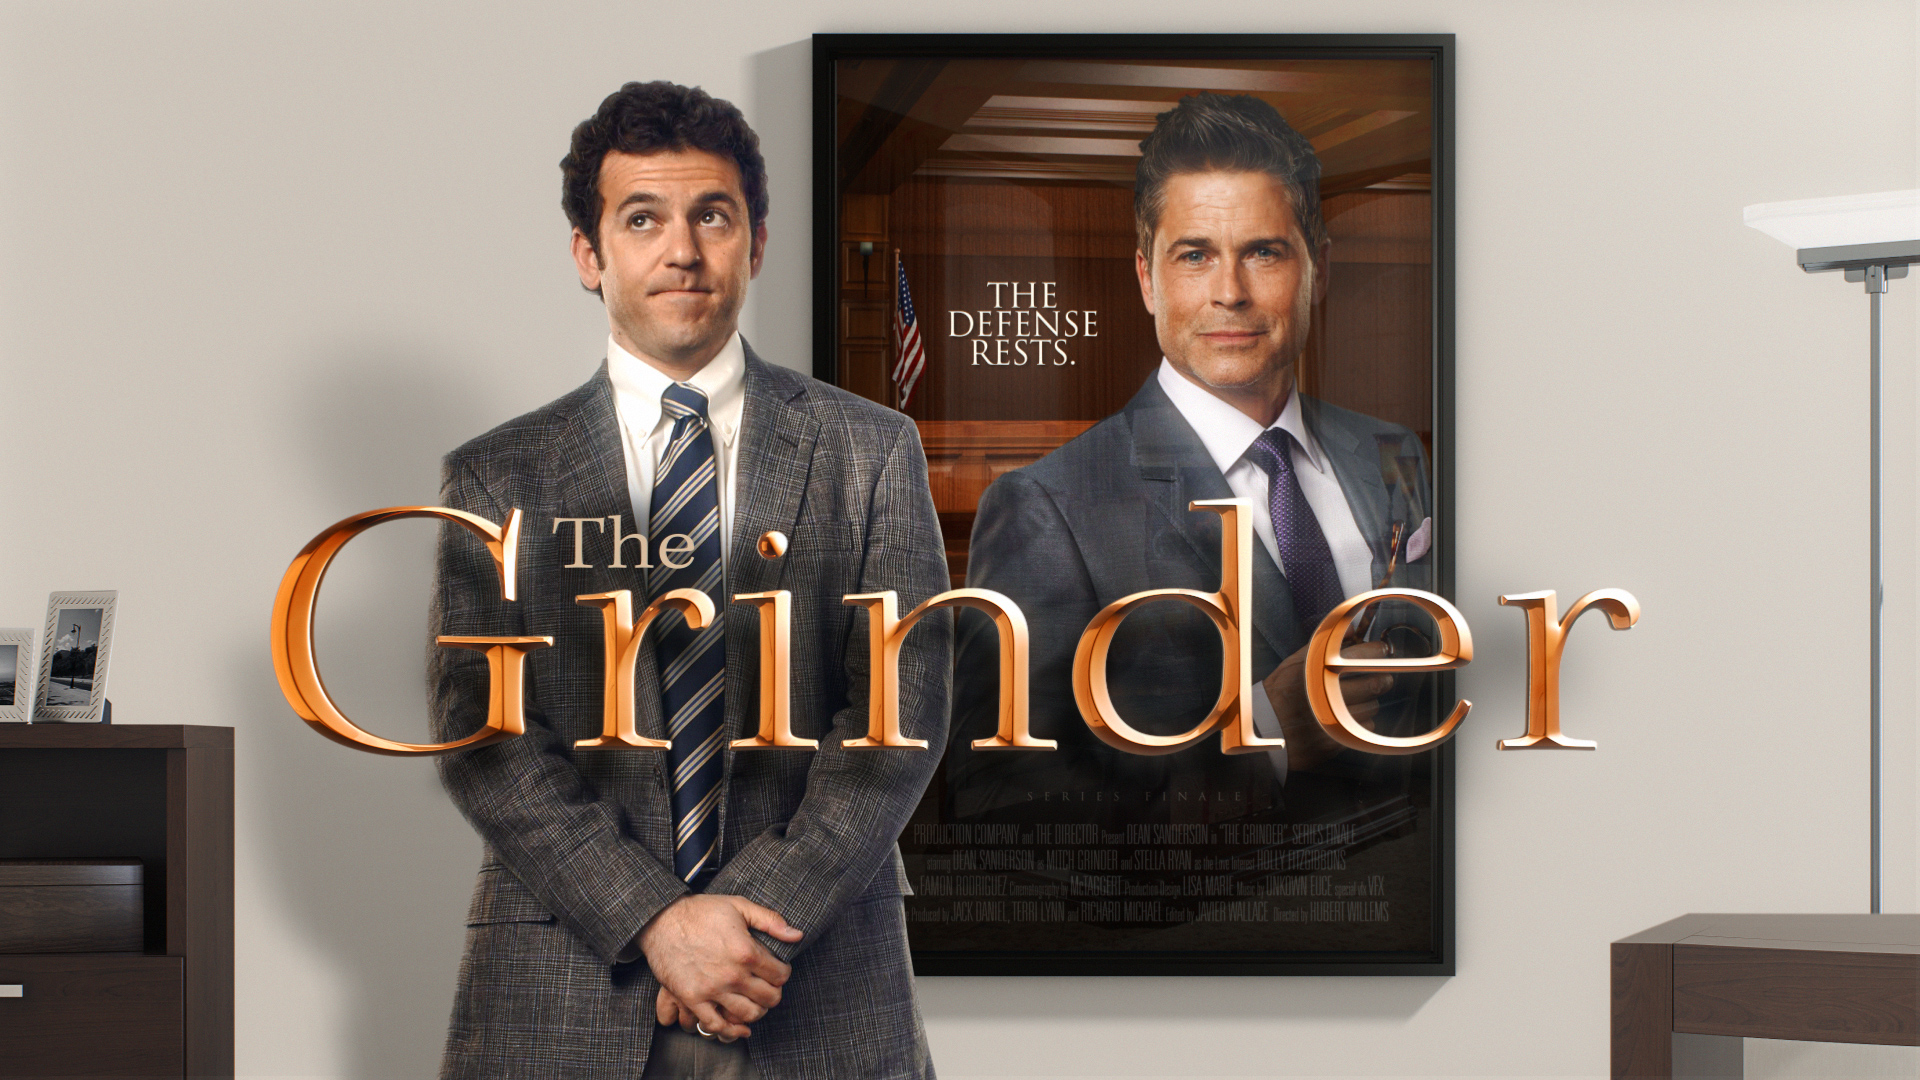 1920x1080 > The Grinder Wallpapers